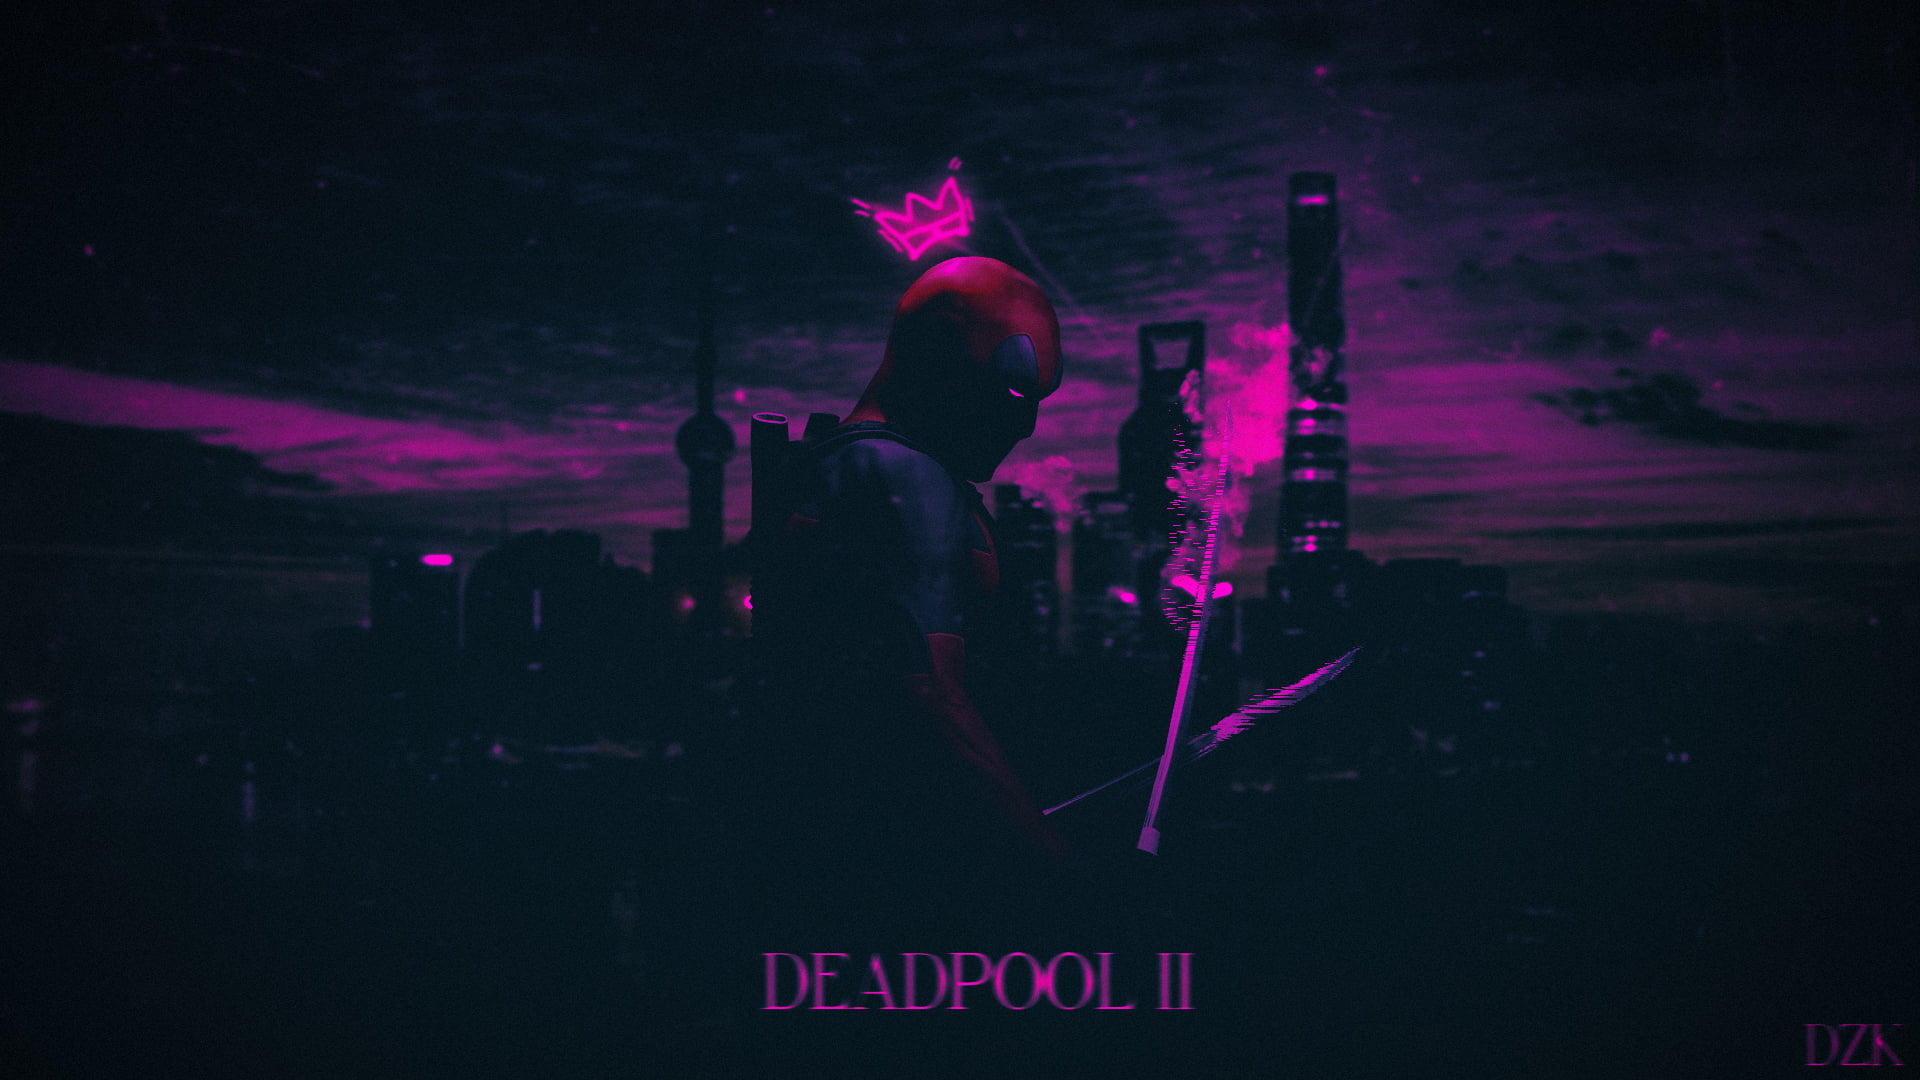 Deadpool 2 wallpaper, Merc with a mouth, Photoshop, colorful